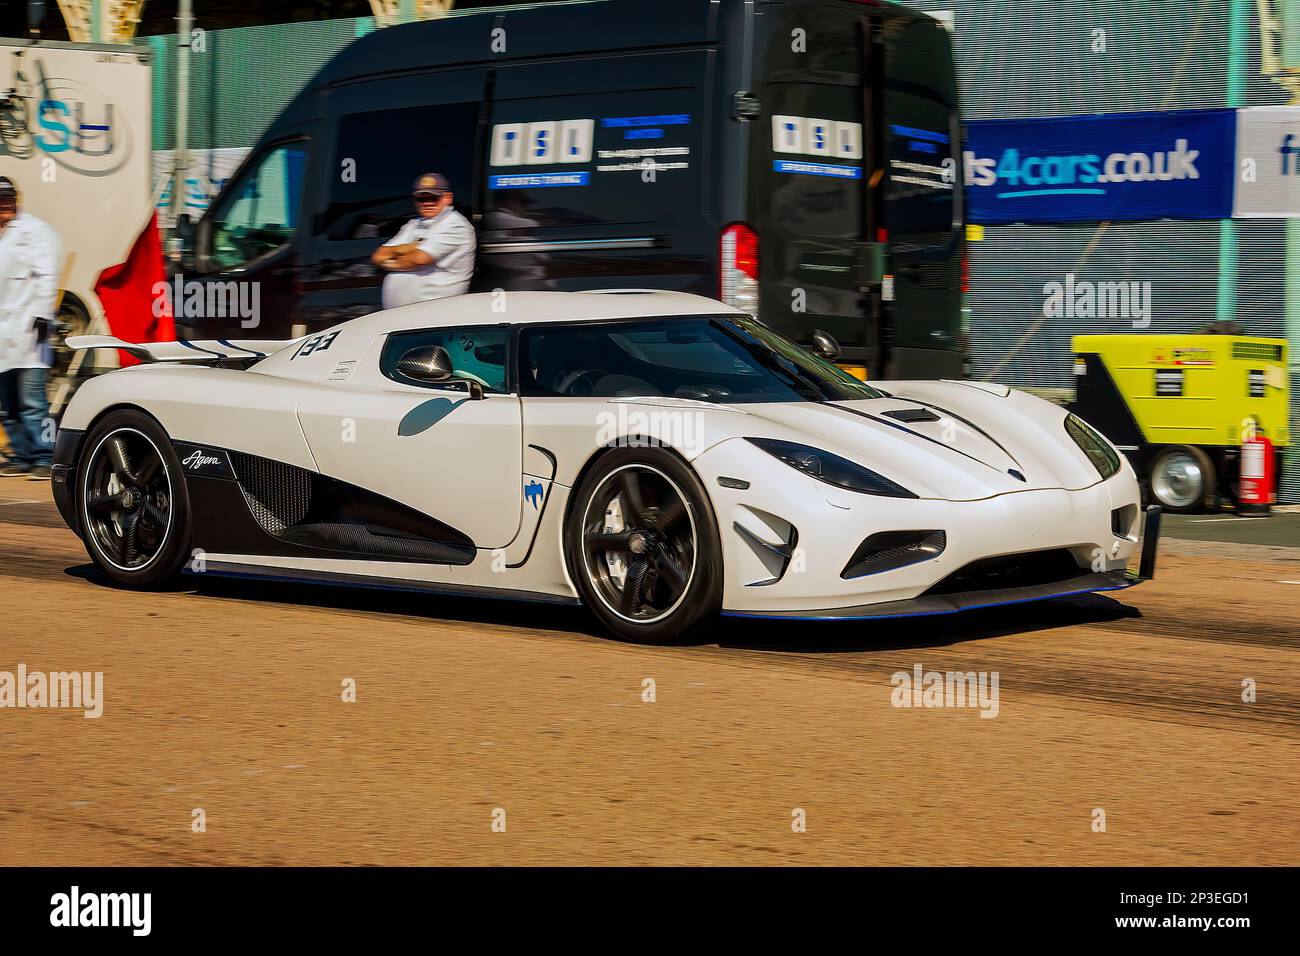 Robert Lewis driving a Koenigsegg at The Brighton National Speed Trials 2018. This is the oldest motor racing event in the UK and is held in the south east coastal town of Brighton. Madeira drive is a road which runs along the seafront and is normal full of people explorer the beach, pier and local attractions. Today it is turned in to a 1/4 time trial course. 1st September 2018 Stock Photo